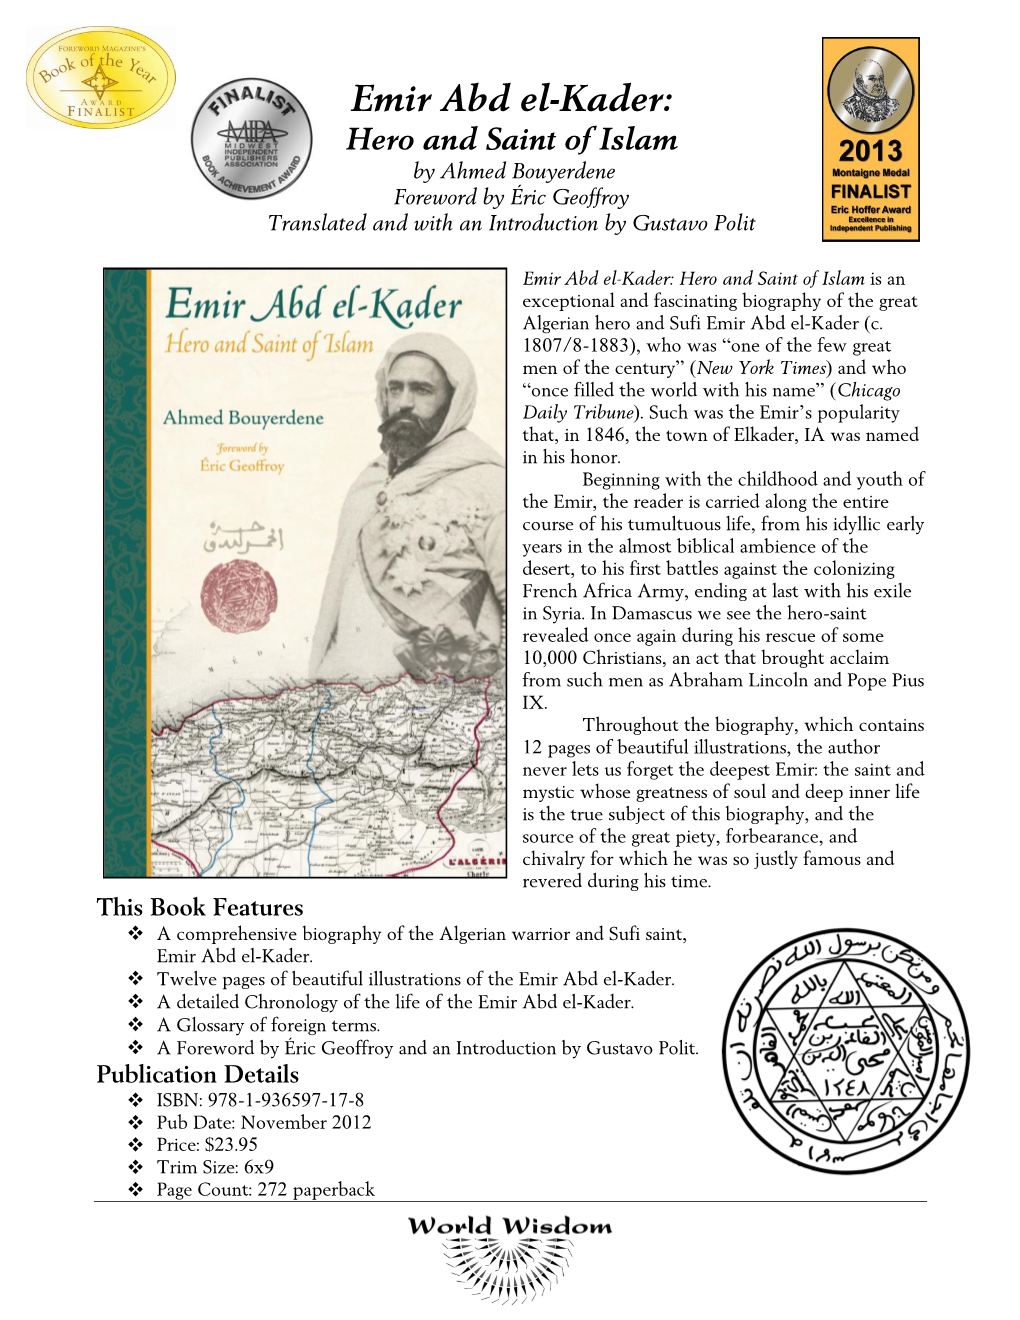 Emir Abd El-Kader: Hero and Saint of Islam by Ahmed Bouyerdene Foreword by Éric Geoffroy Translated and with an Introduction by Gustavo Polit